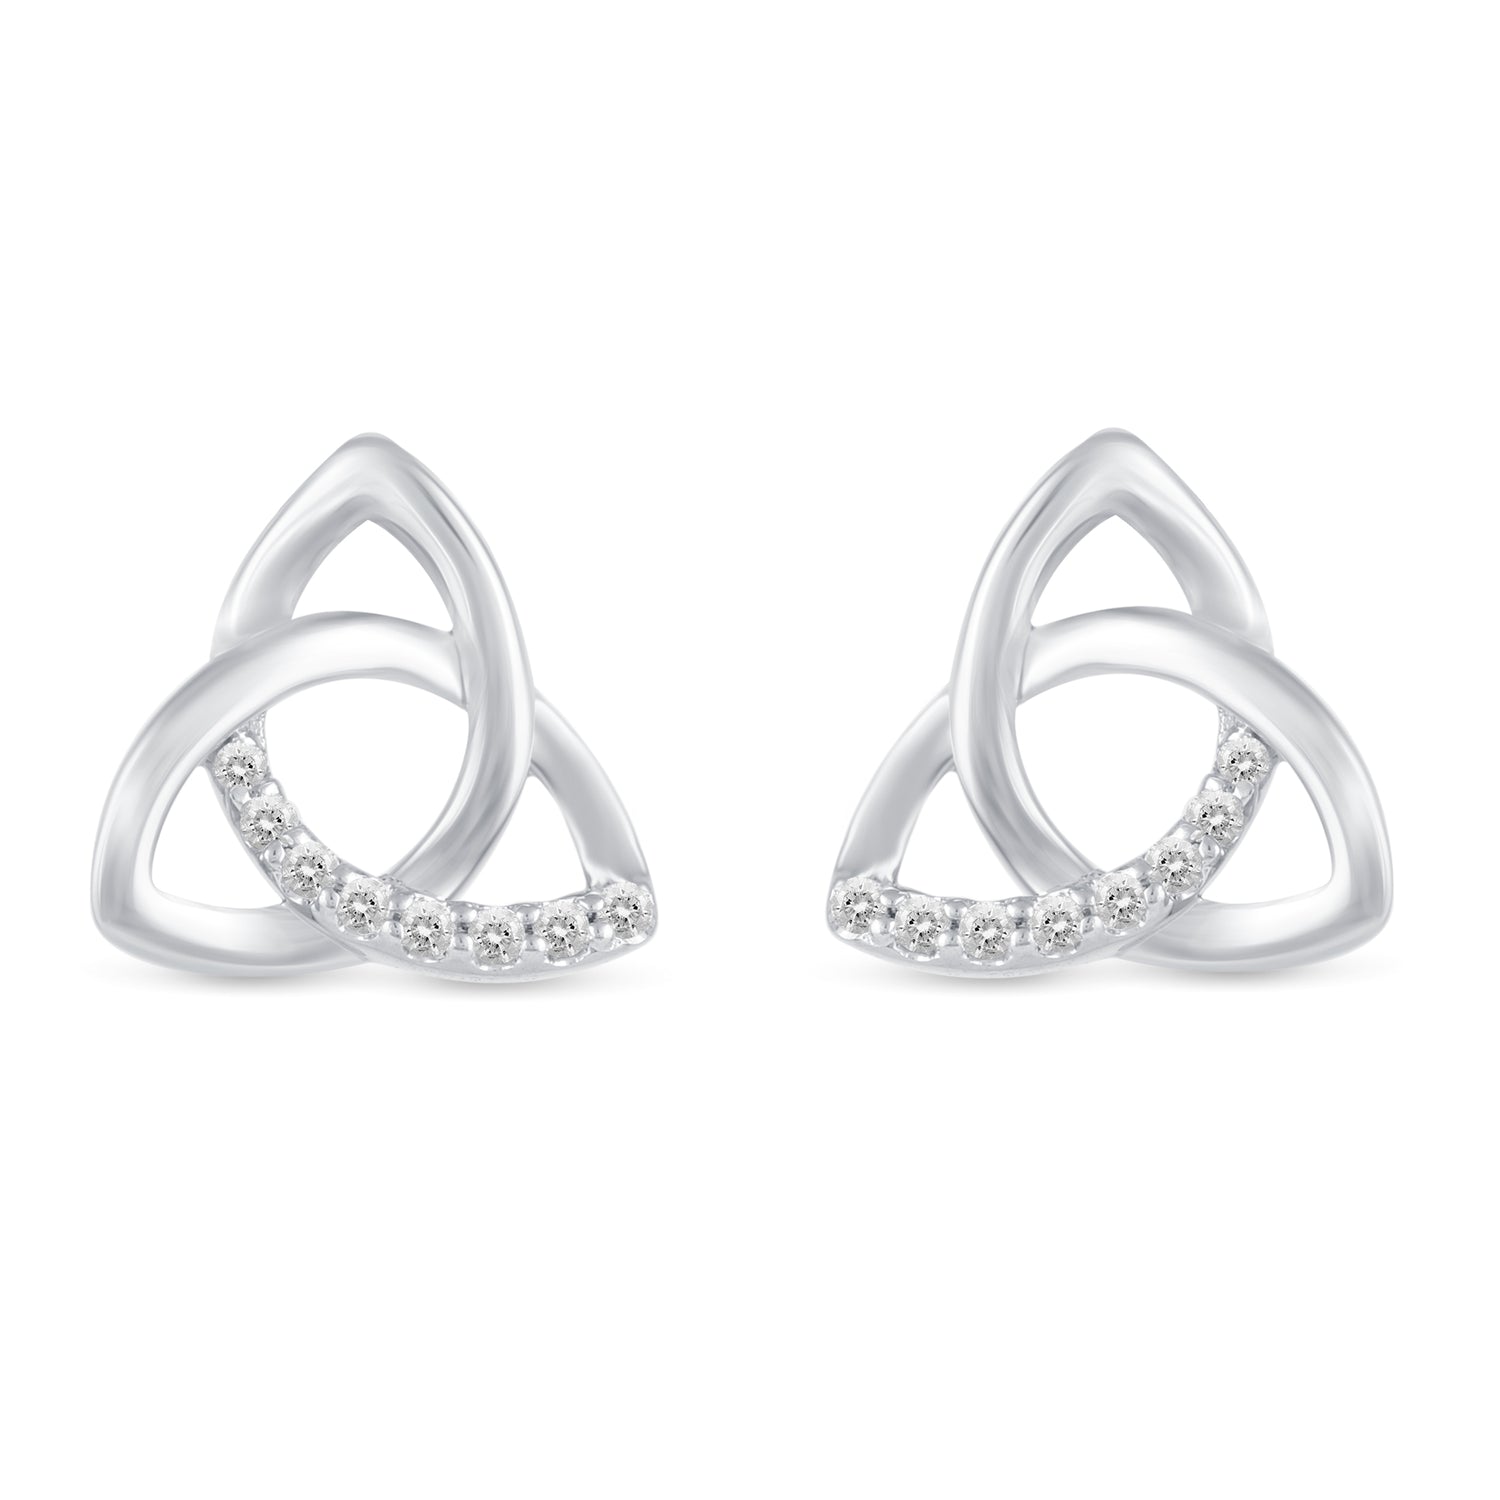 Set of 2 : 1/5 CT TW Diamond Trinity Knot Triquetra Pendant & Earrings in 925 Sterling Silver